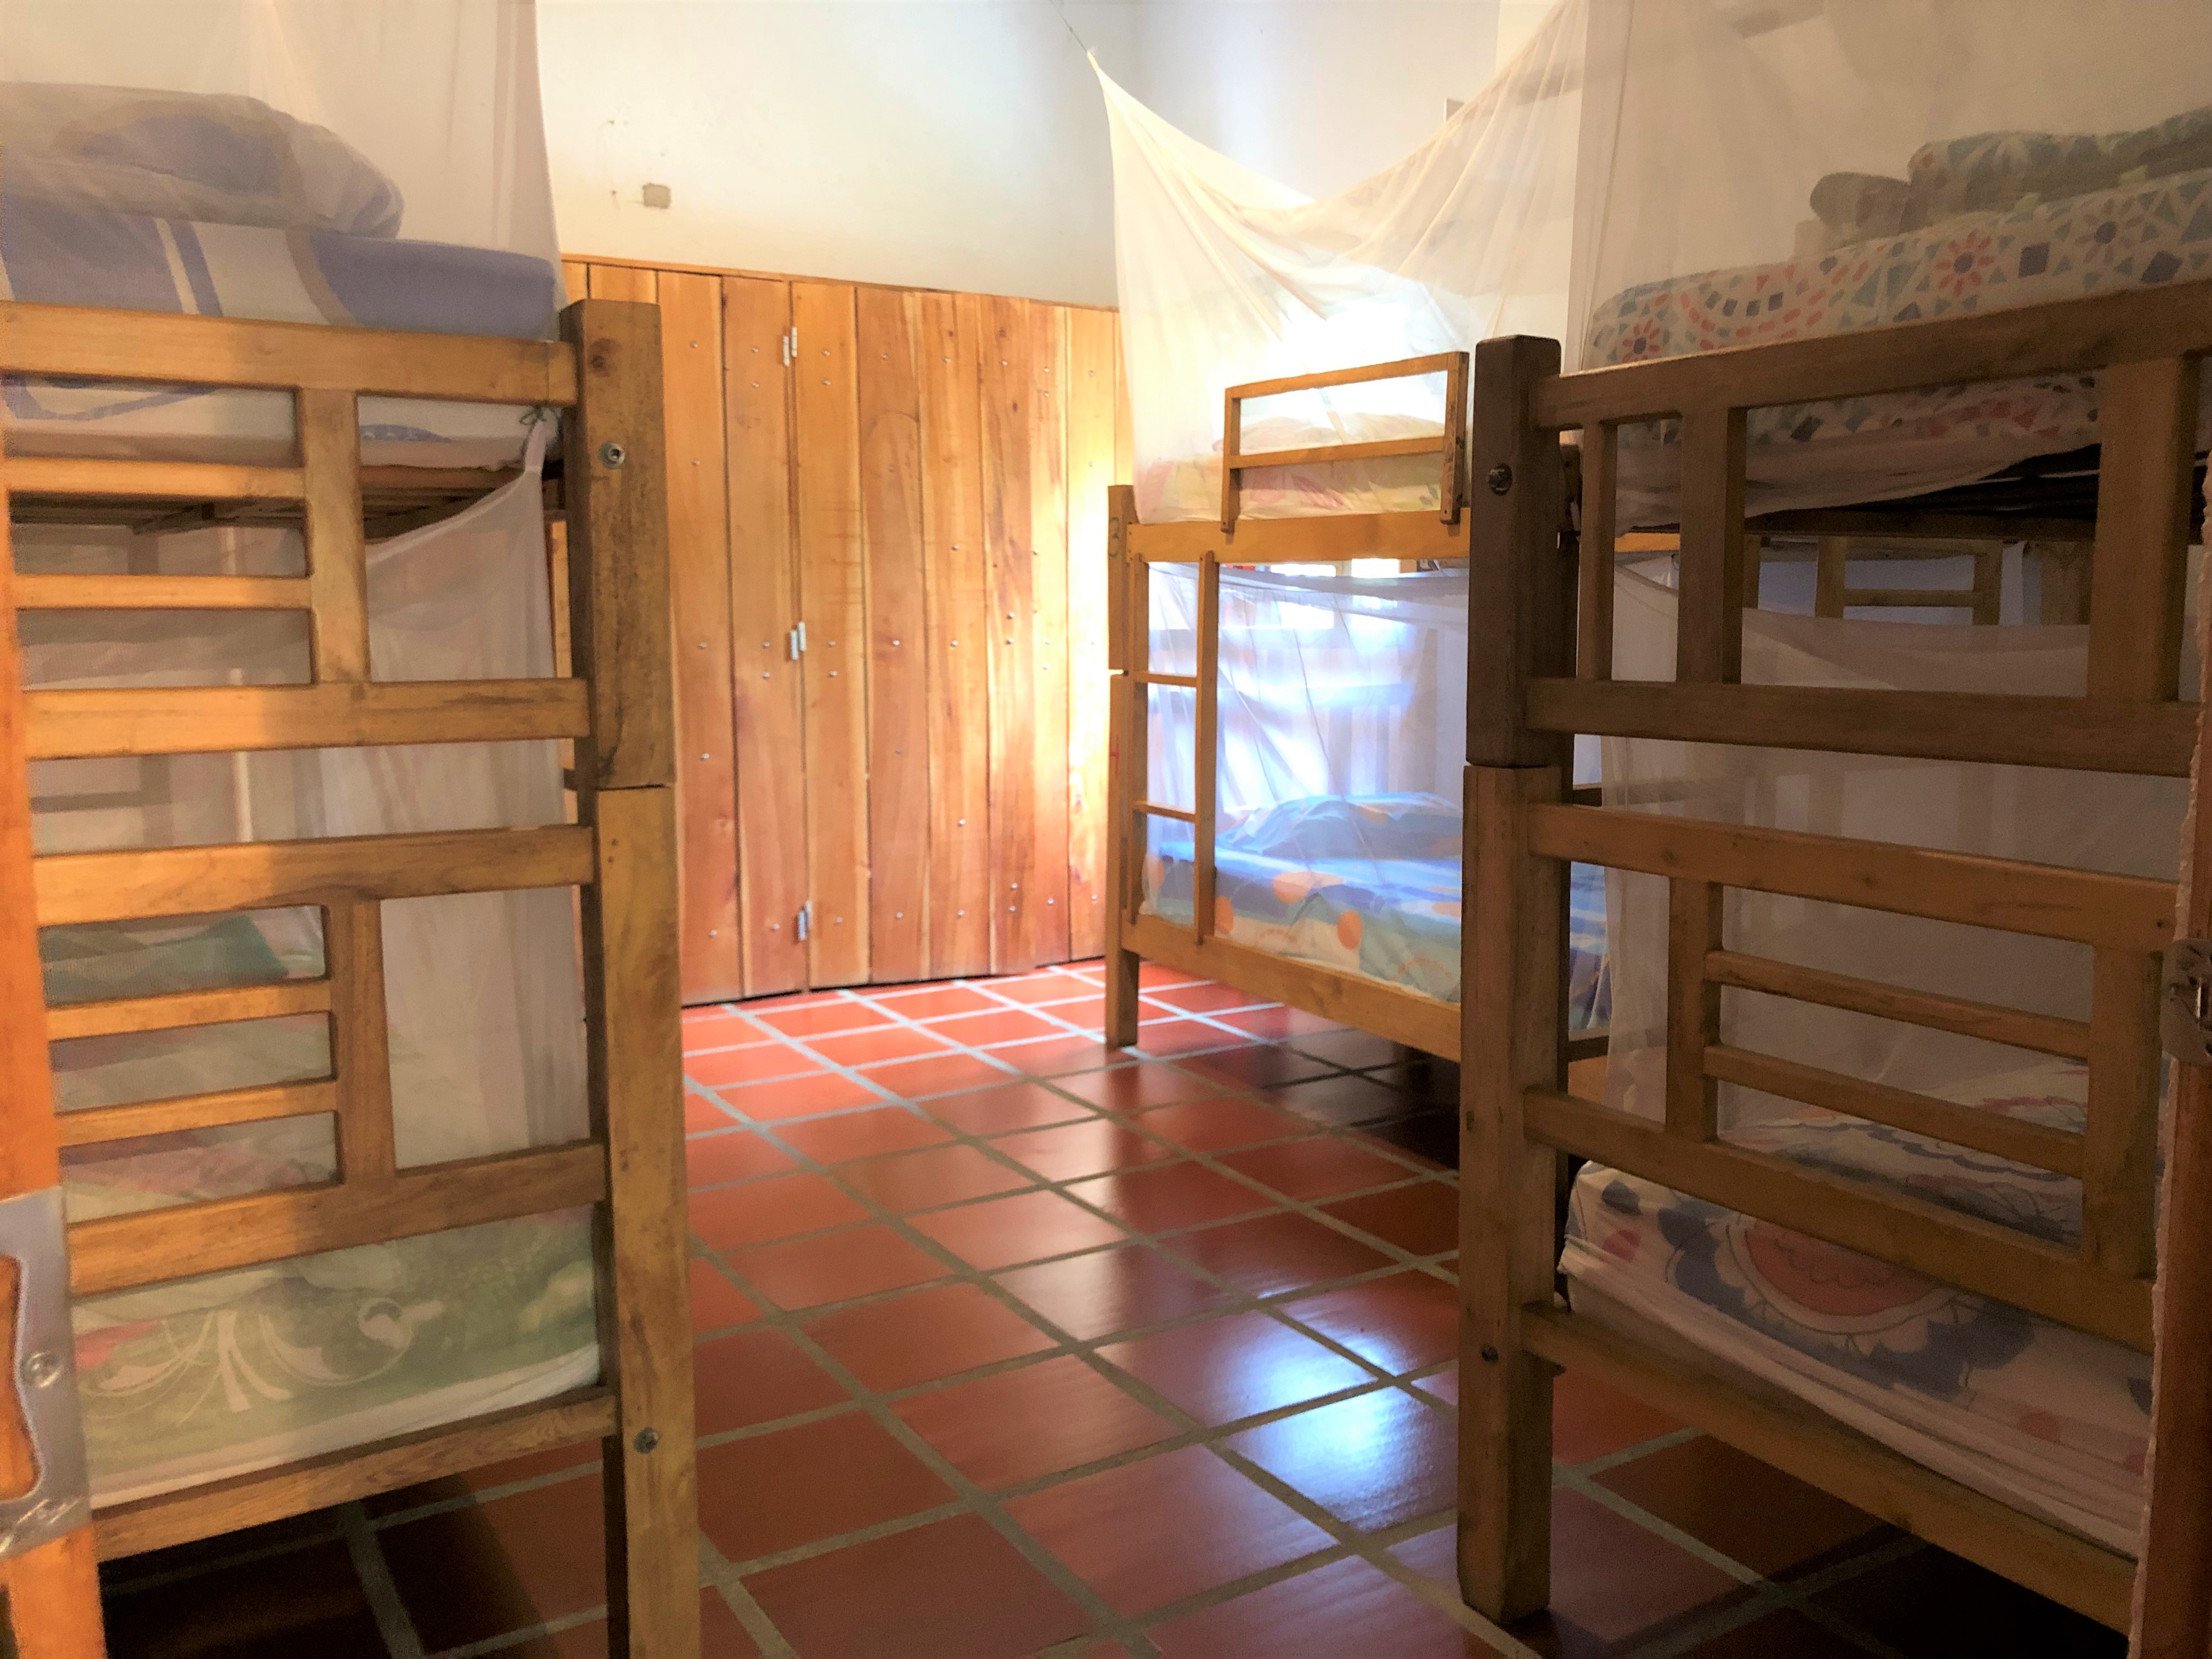 DORM WITH AC AND 8 SINGLE BEDS – MIRADOR